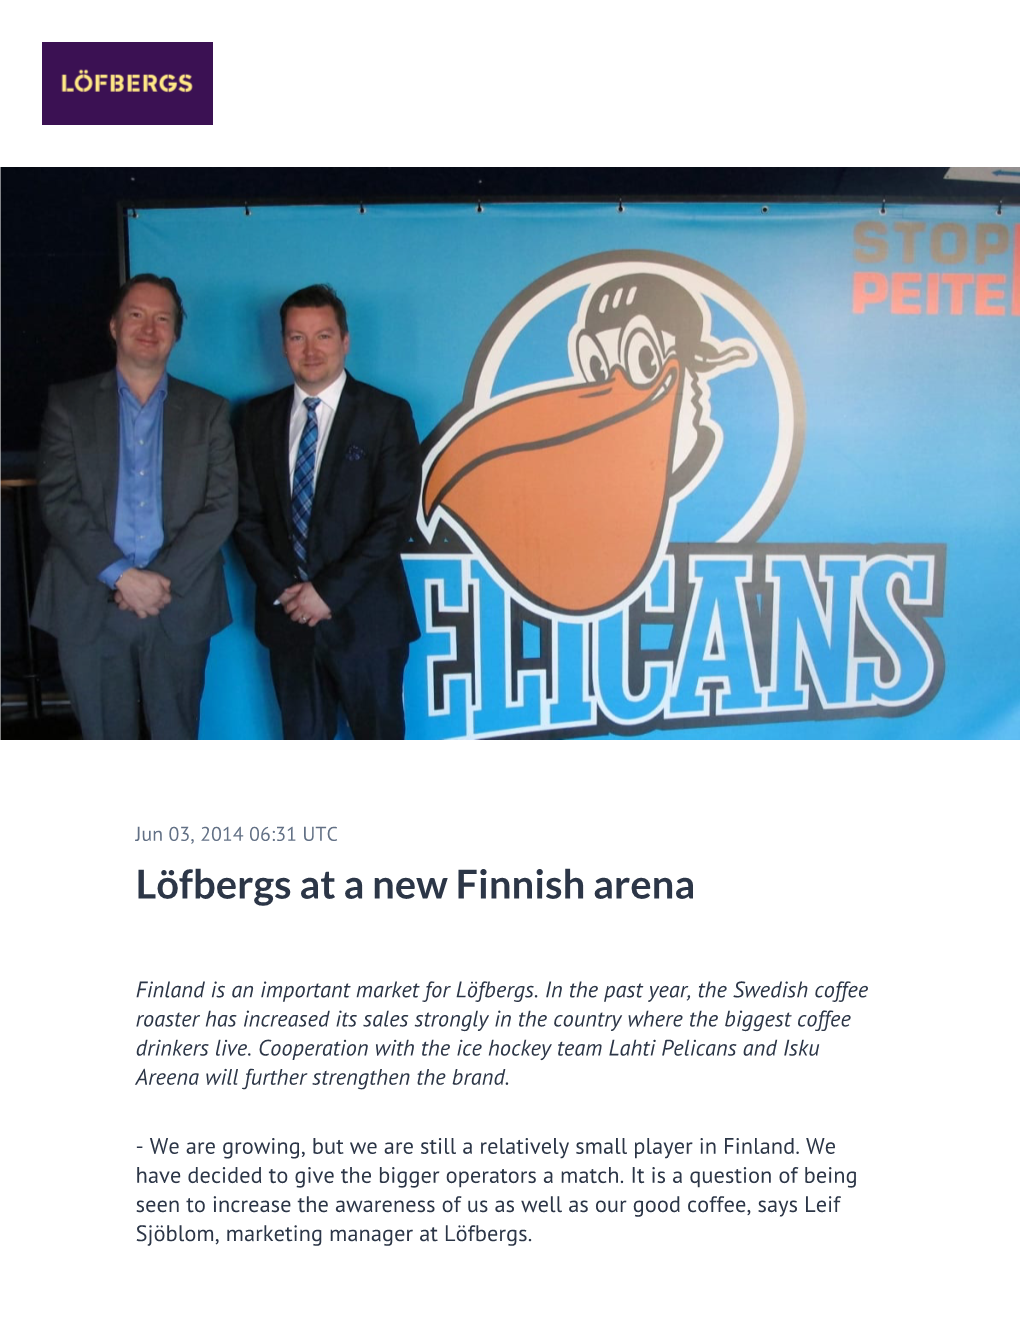 Löfbergs at a New Finnish Arena